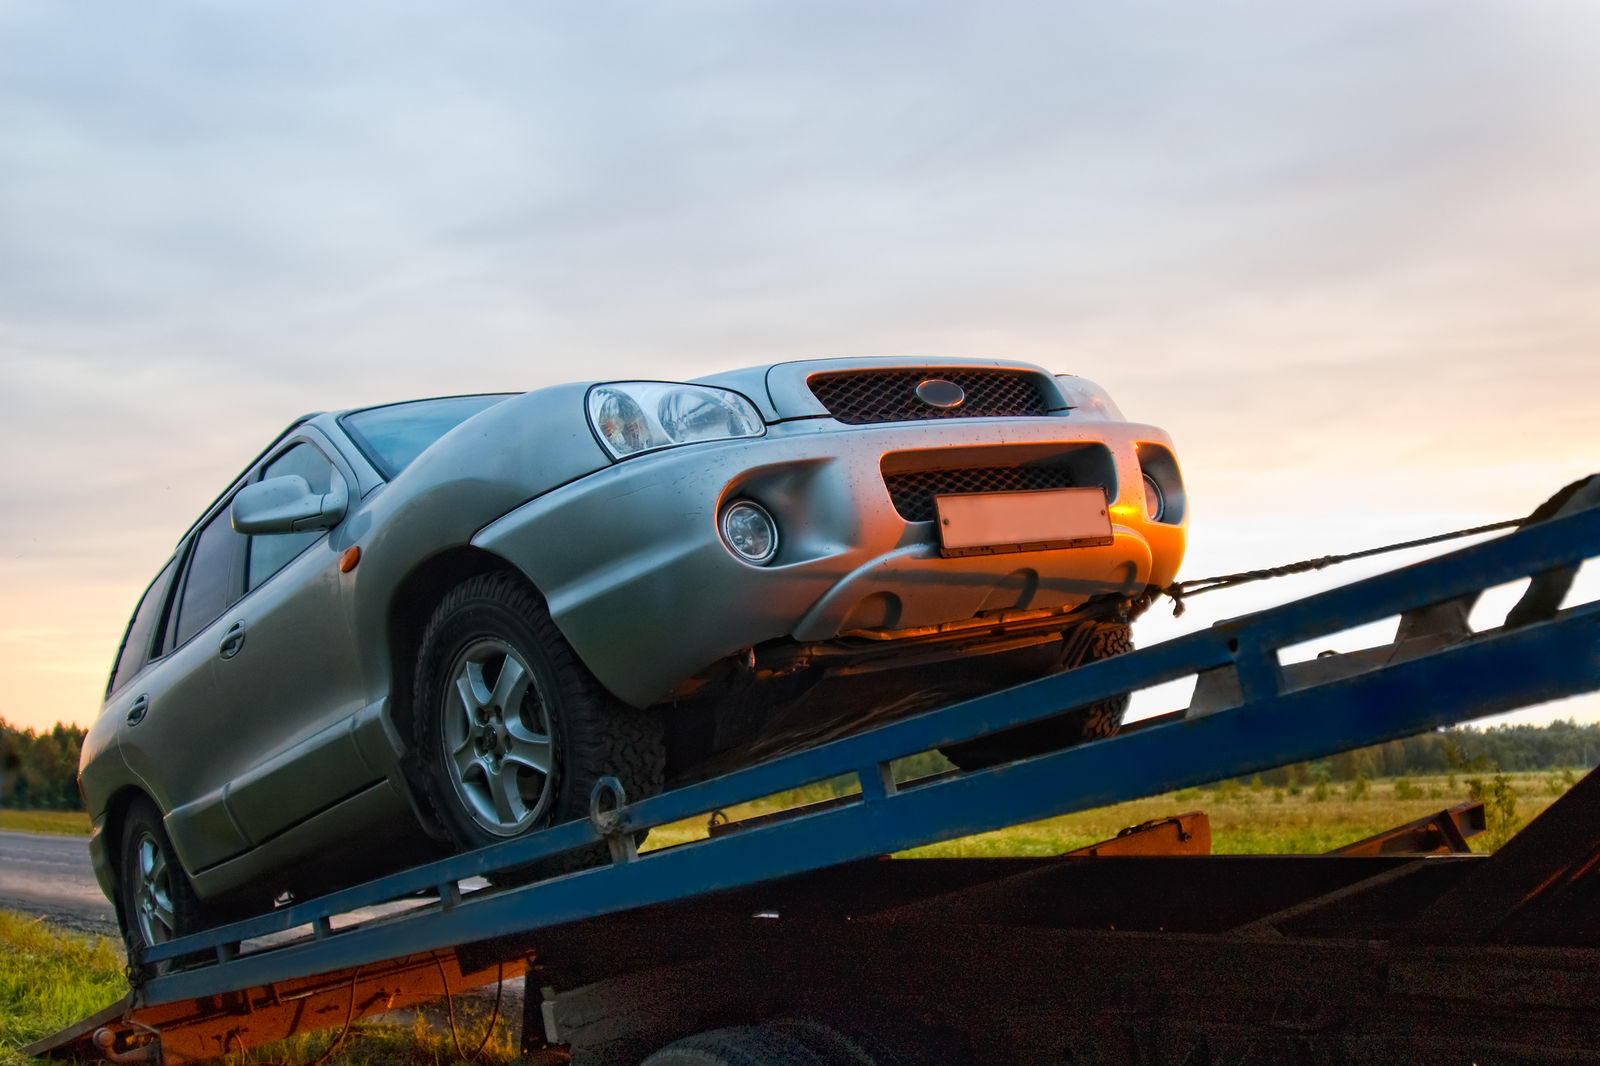 Can I tow a car with no insurance?